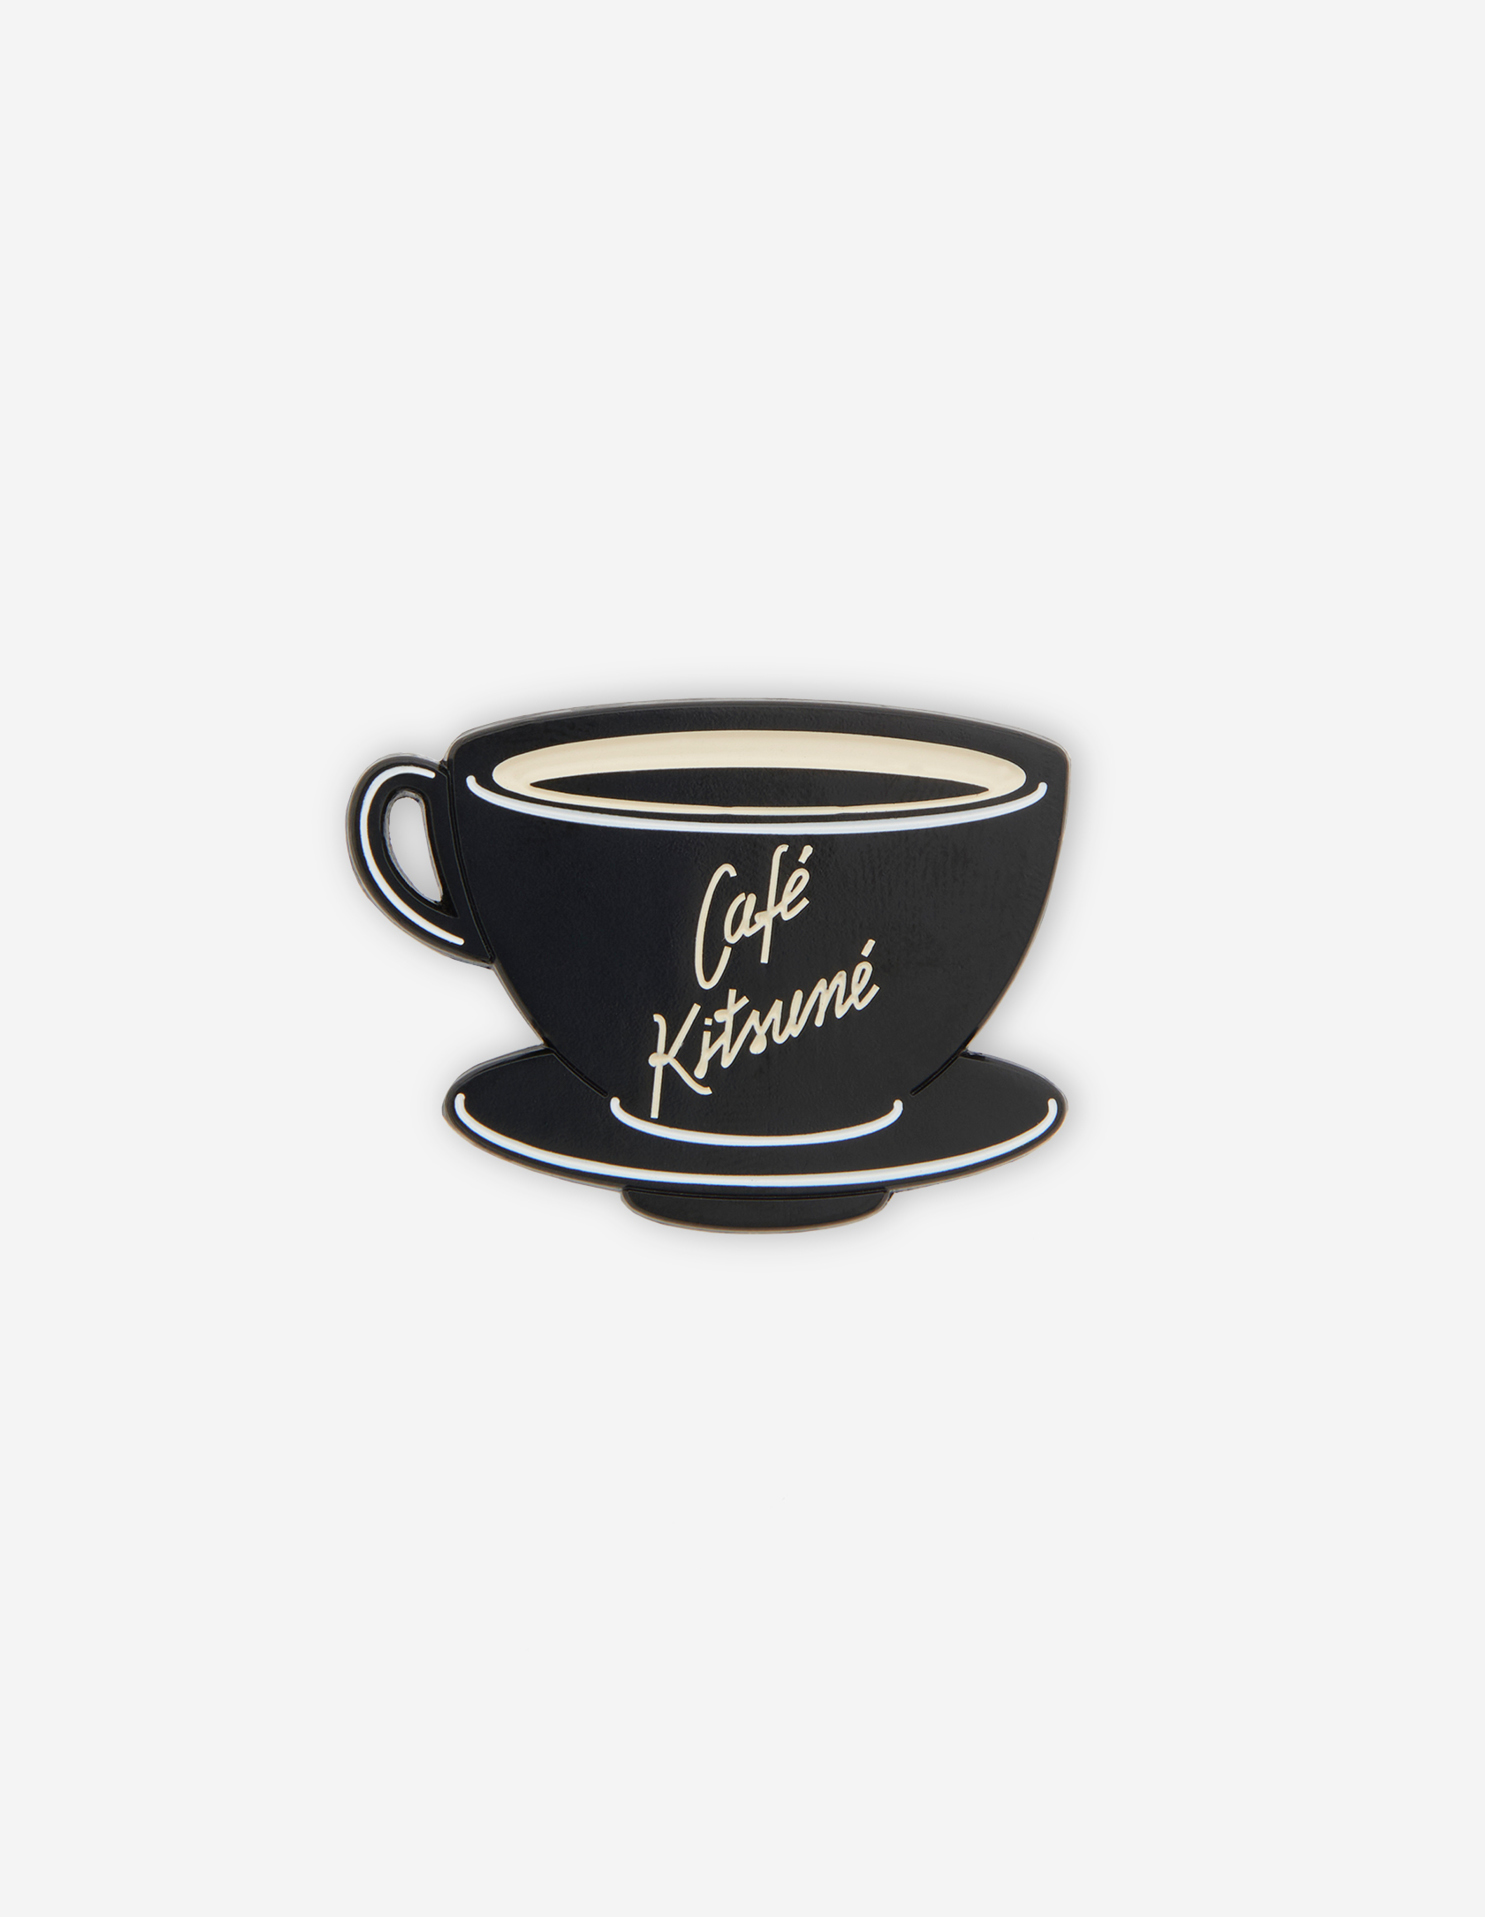 PINS CAFE KITSUNE CUP   